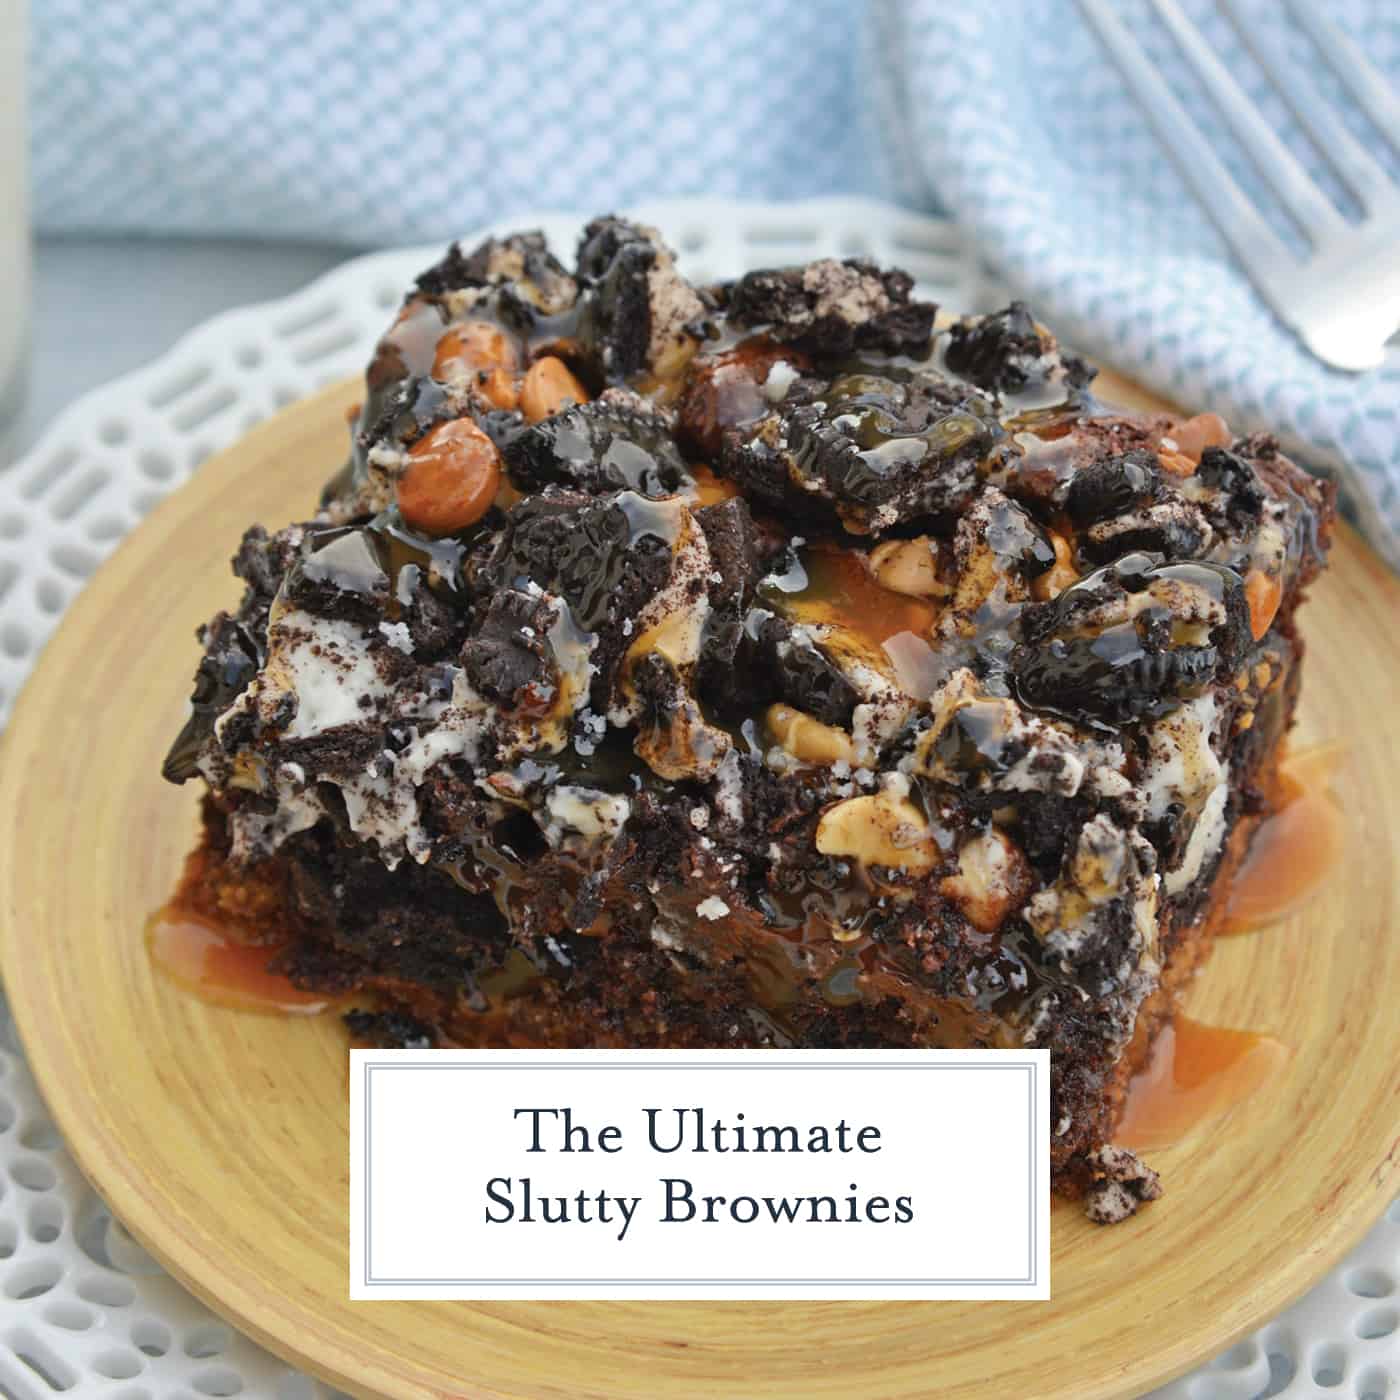 The Ultimate Slutty Brownies are layers of chocolate chip cookie dough, brownie, Oreo cookies, caramel and sea salt. The perfect decadent, sweet and salty easy dessert recipe. #sluttybrownies #bestbrownierecipe #homemadebrownies www.savoryexperiments.com